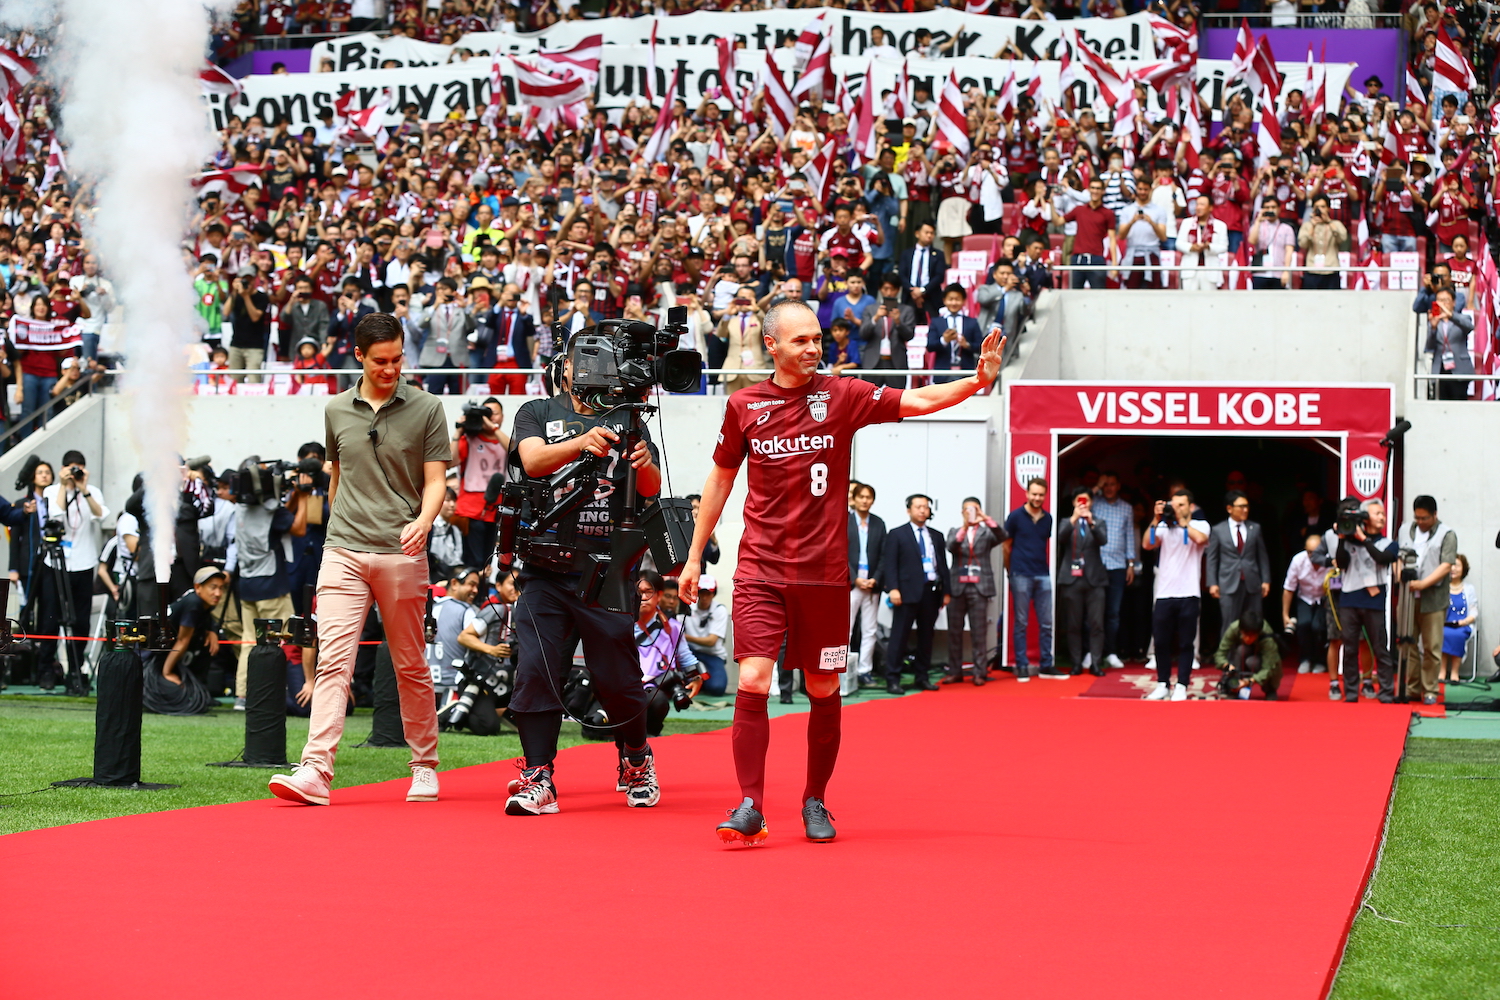 Thousands show up to Vissel Kobe fan event to welcome Iniesta ‘home’